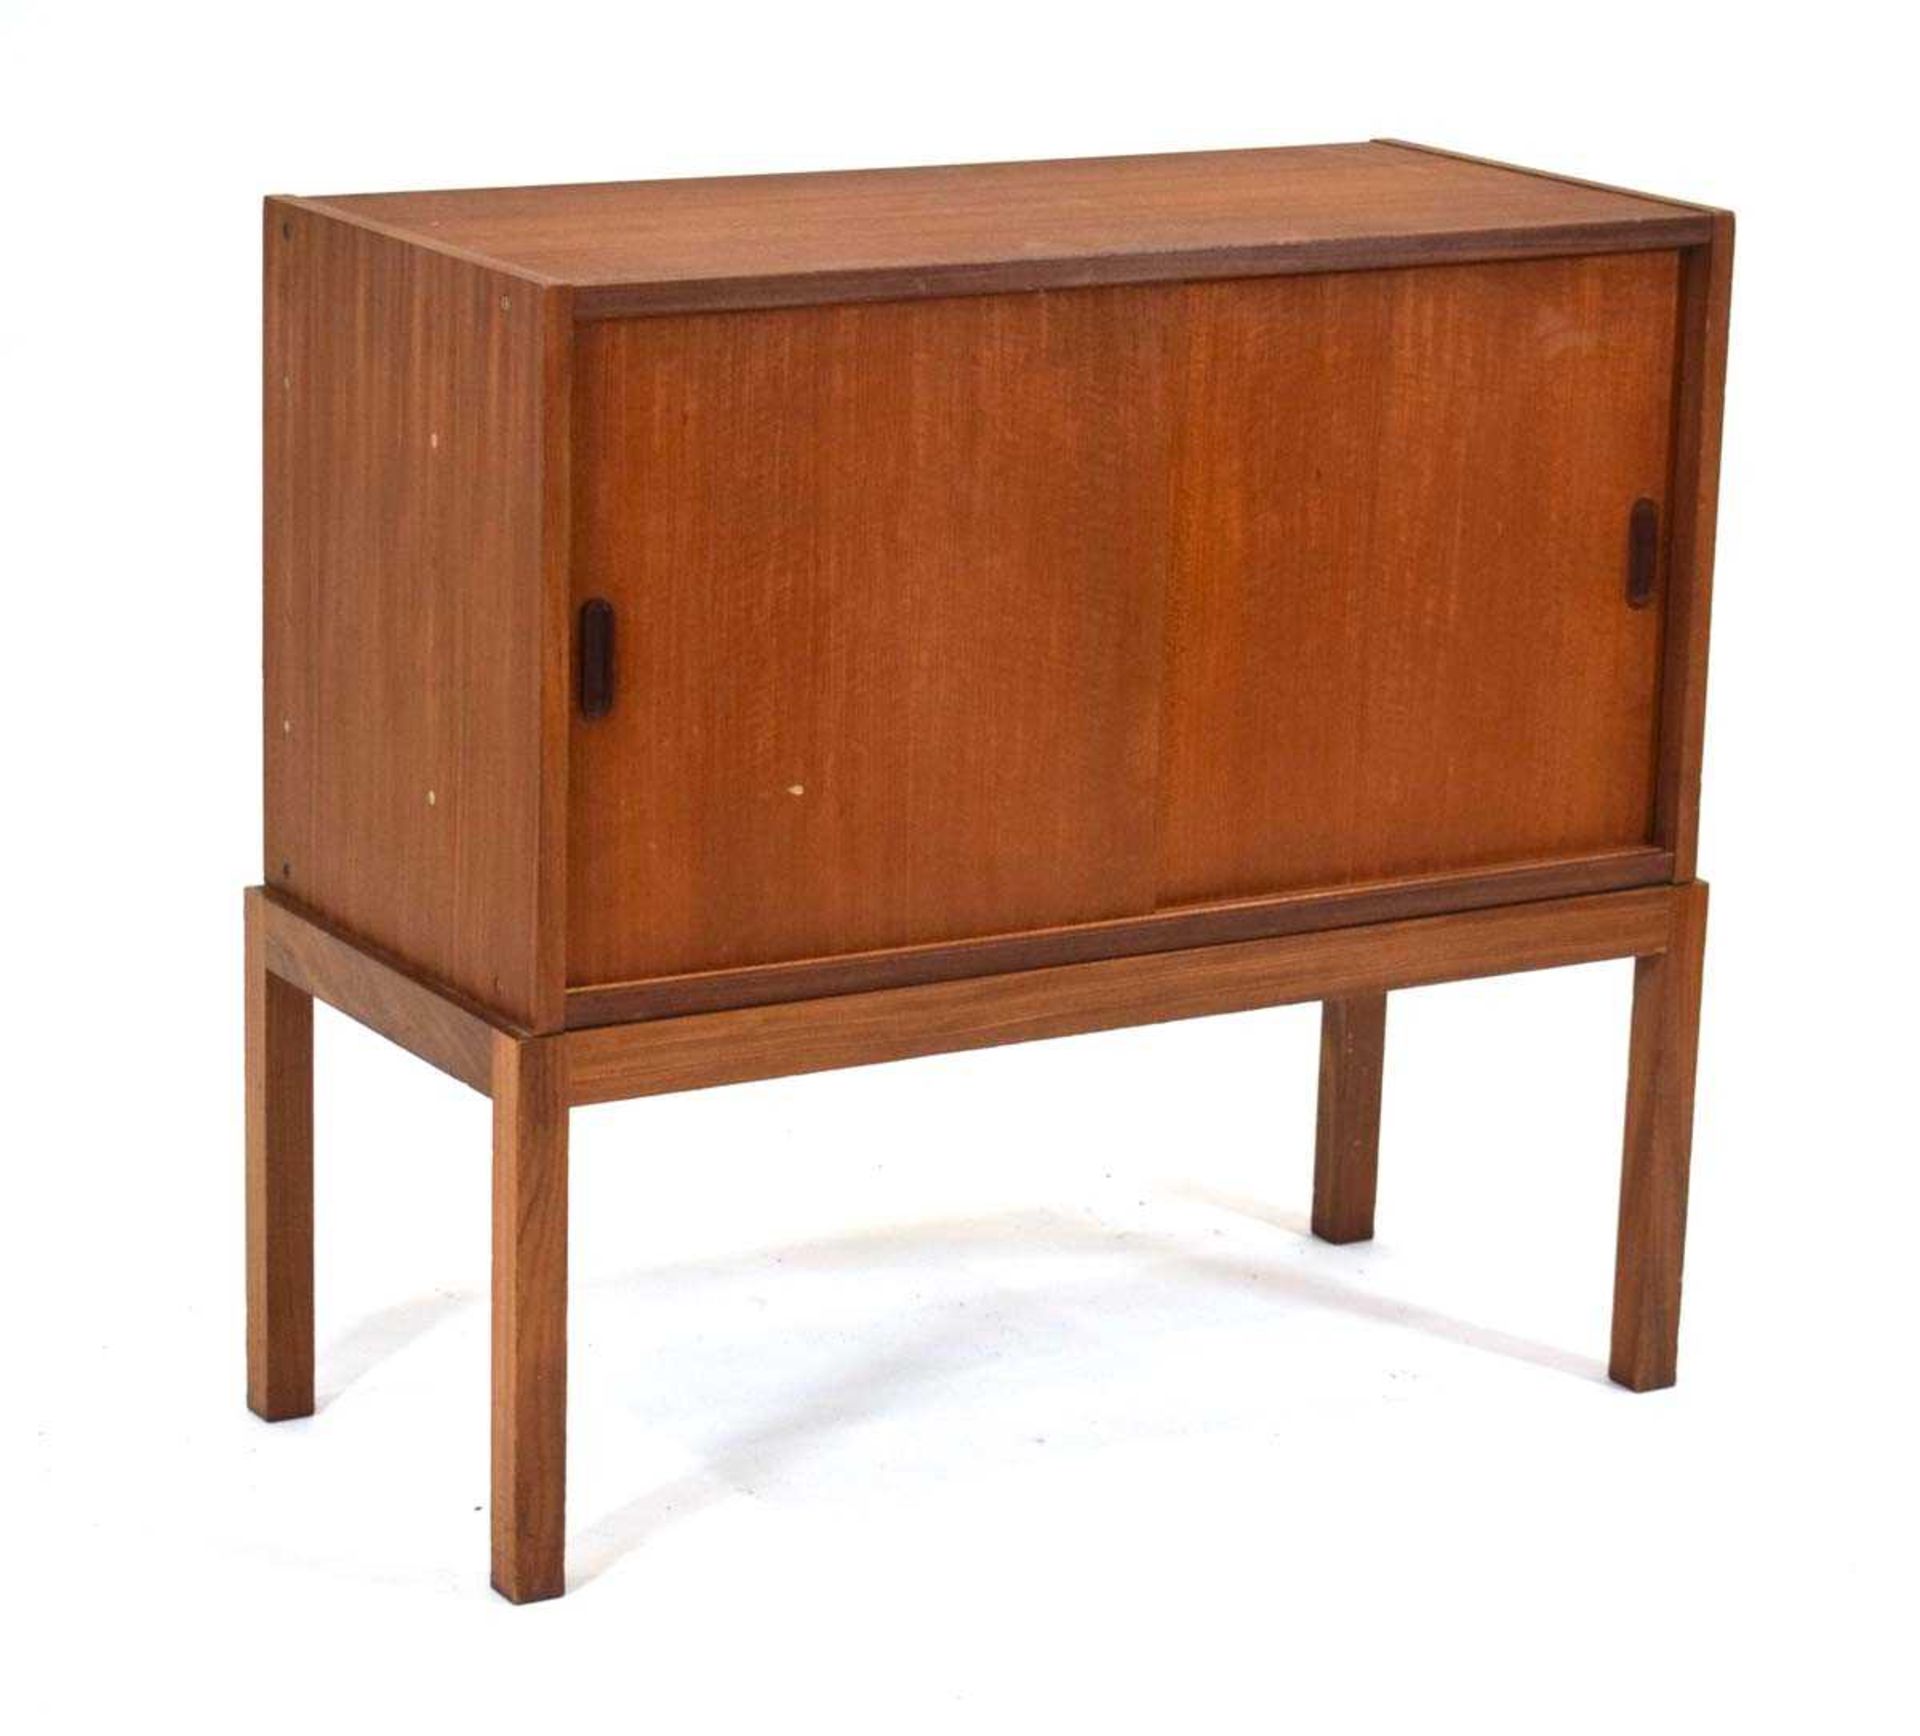 A 1970's teak cabinet with two sliding doors on square legs, 89 x 40 x 43 cm